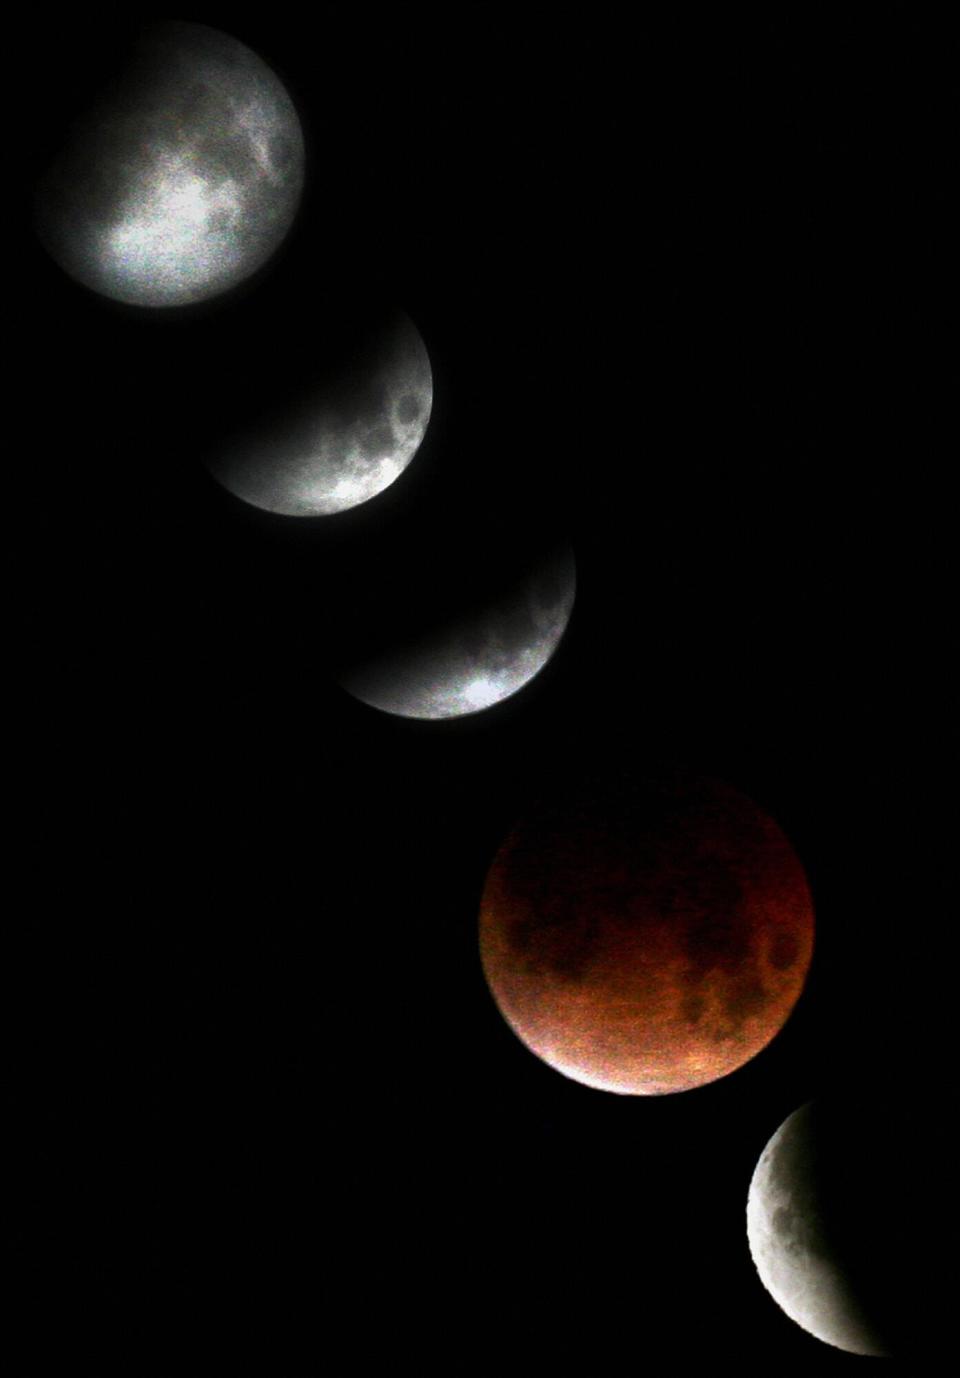 various stages of the lunar eclipse